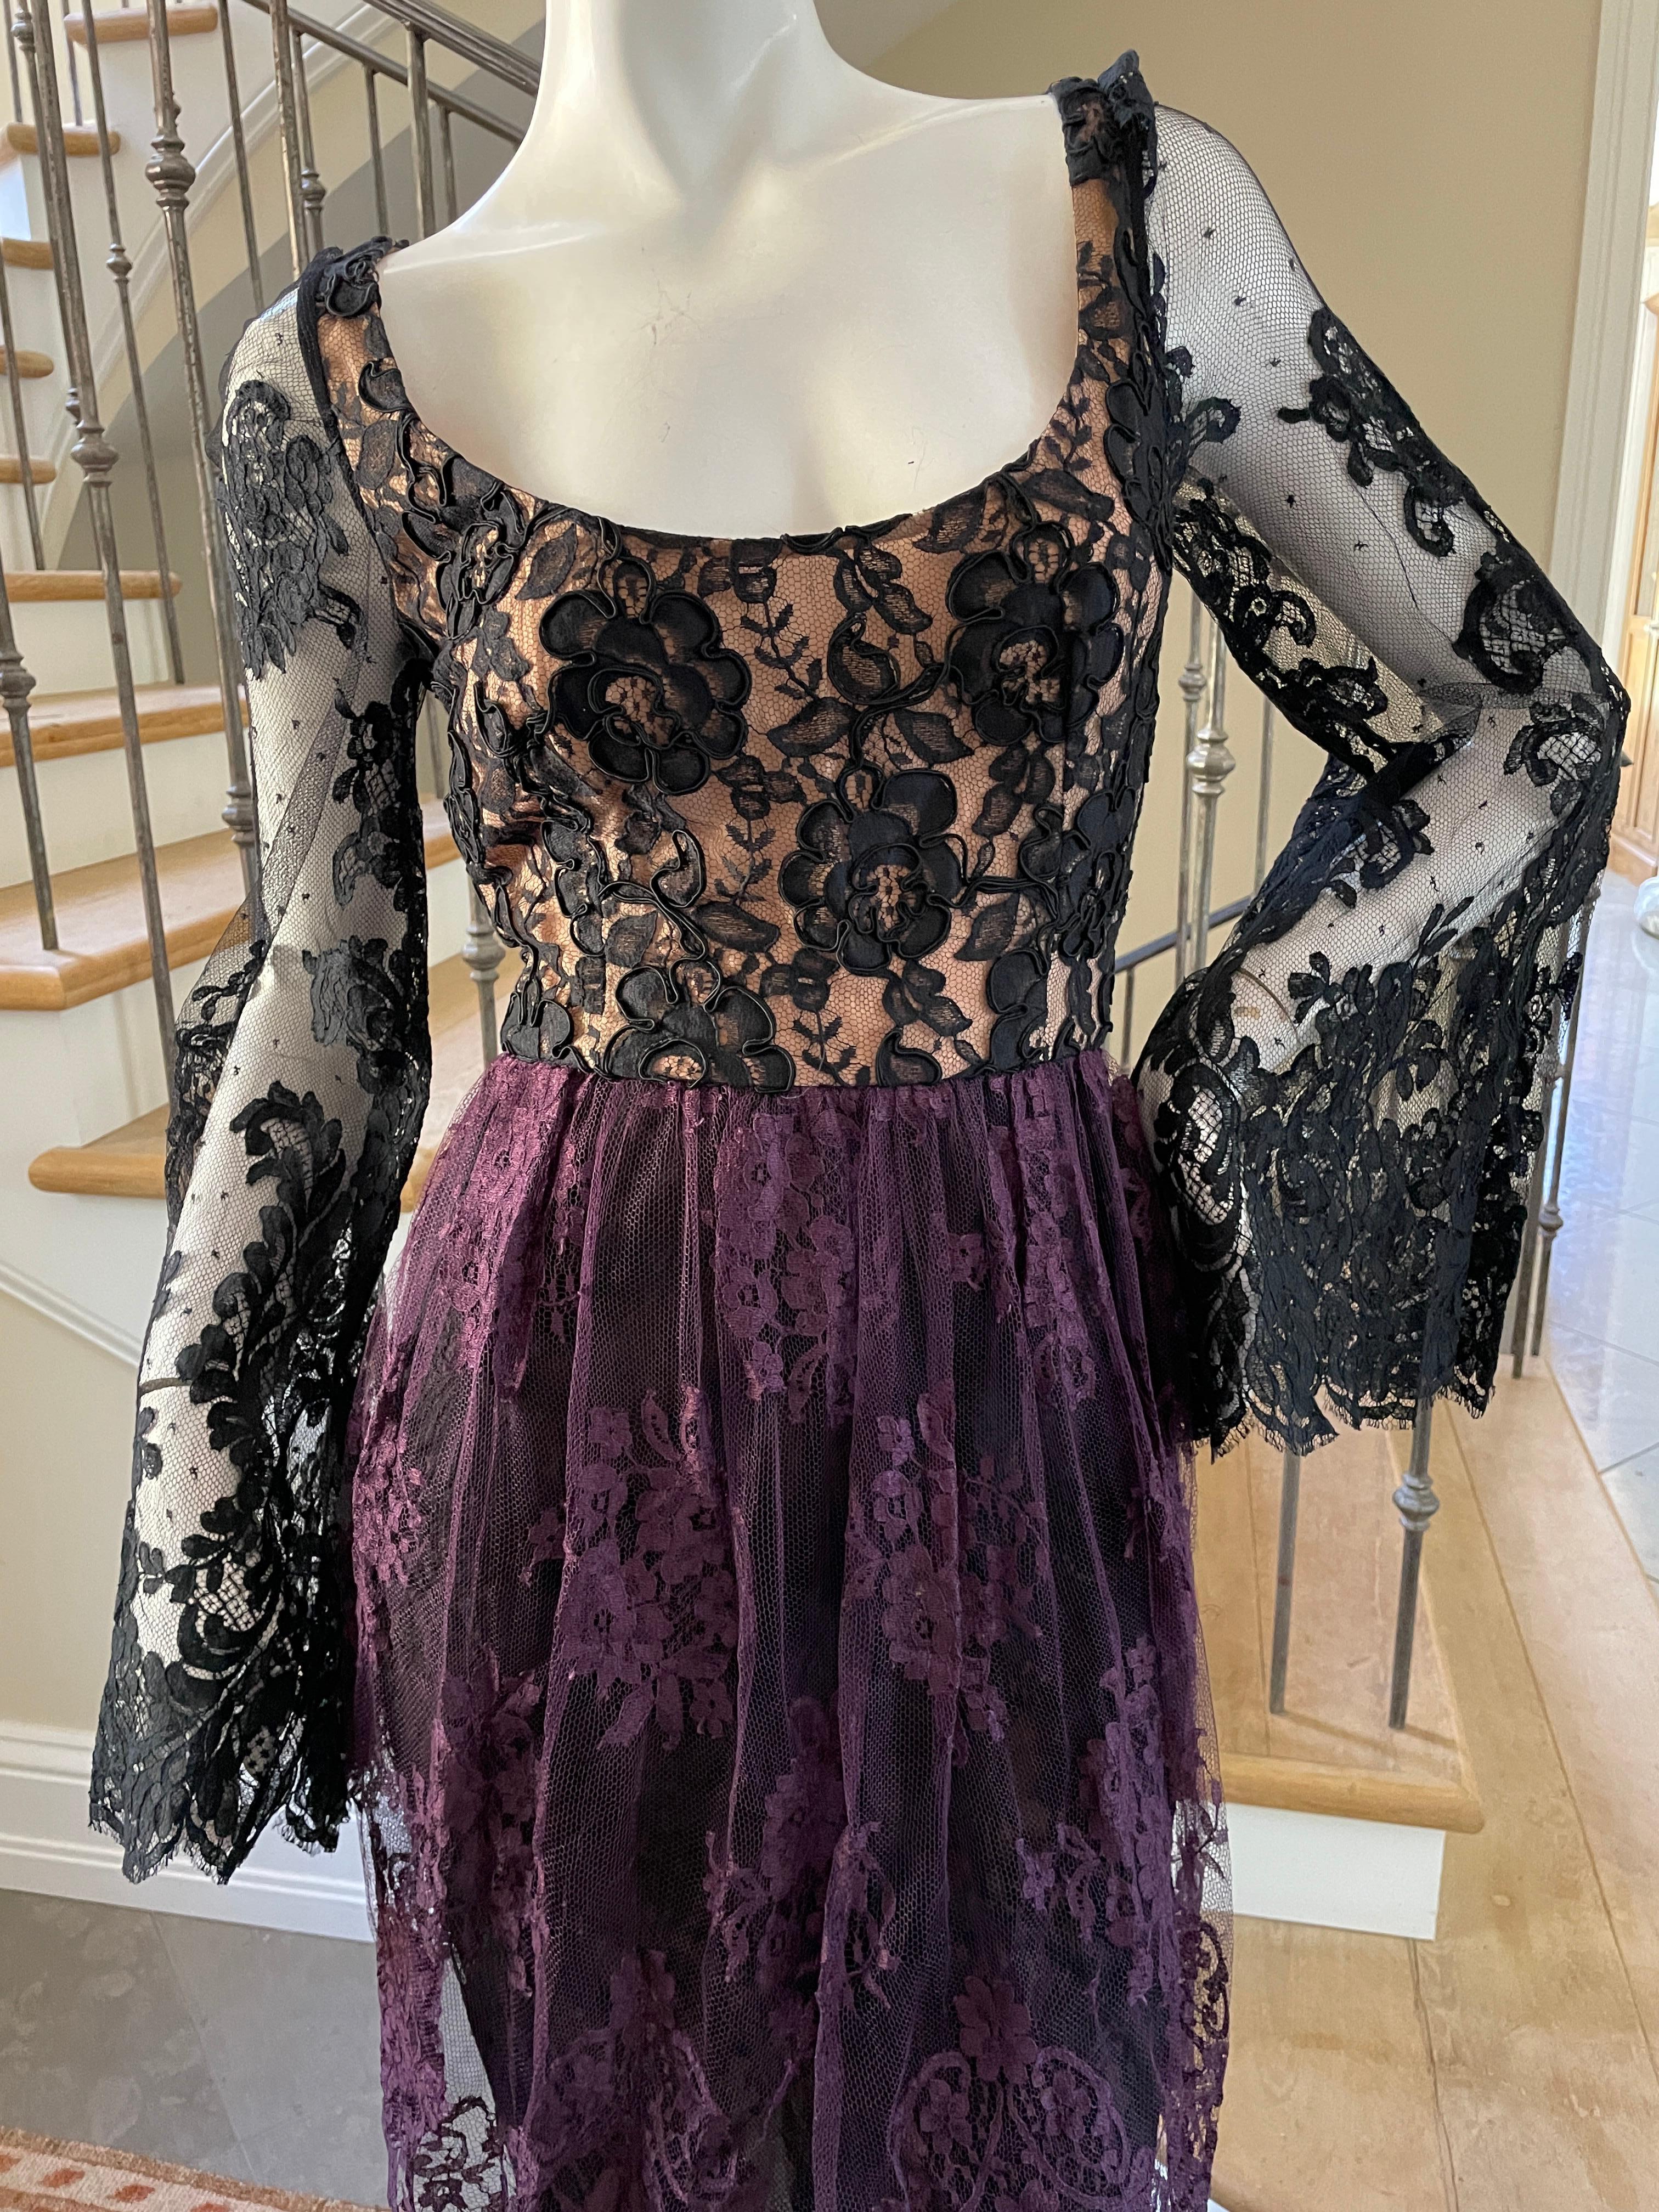 Bill Blass Vintage Lace Bell Sleeve Cocktail Dress from Saks Fifth Avenue In Excellent Condition For Sale In Cloverdale, CA